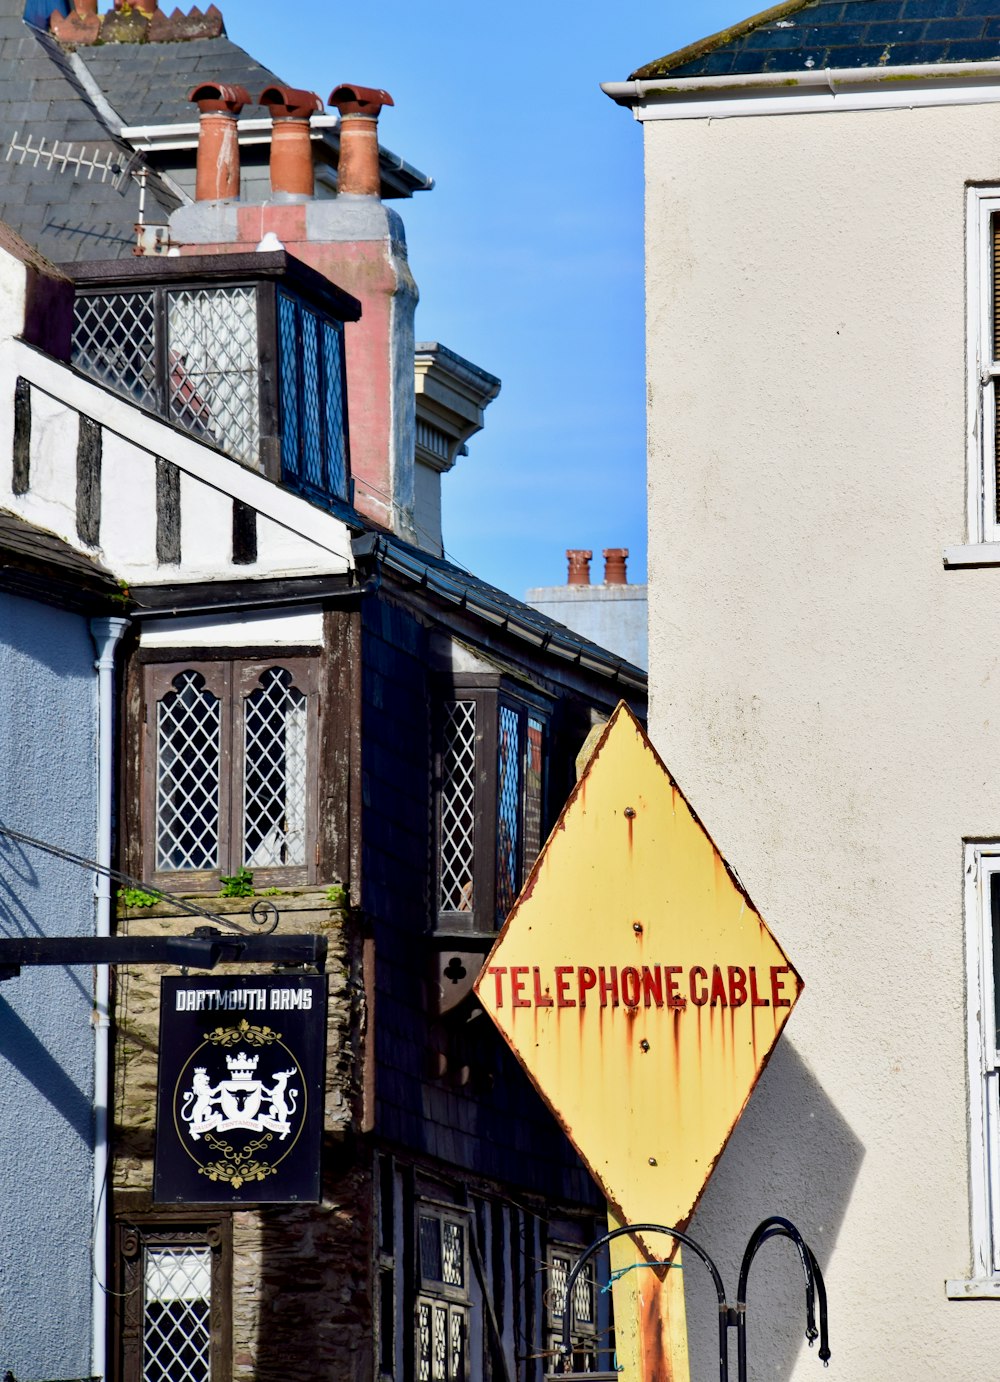 a telephone cable sign in front of a building